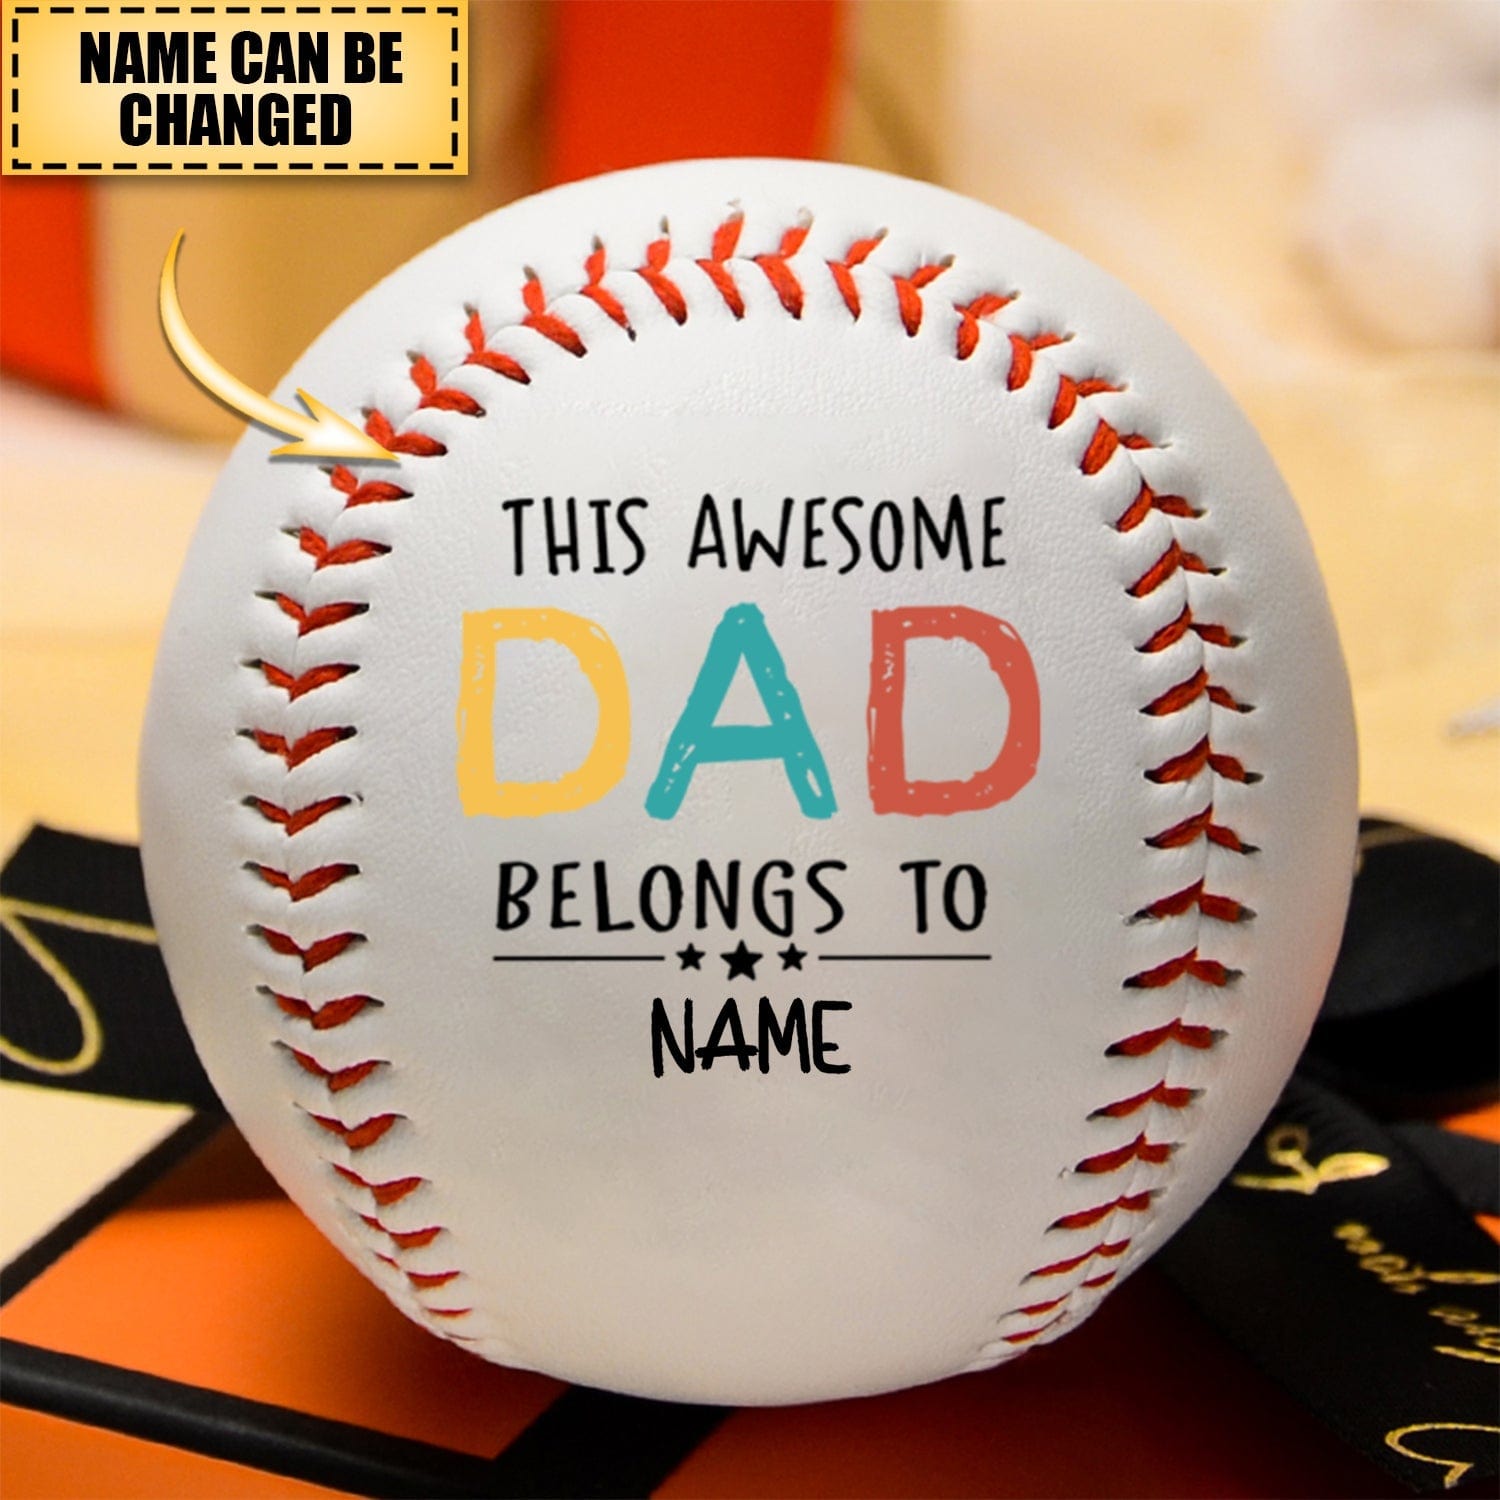 This Awesome Dad Belongs To - Personalized Custom Baseball - Gift for Dad